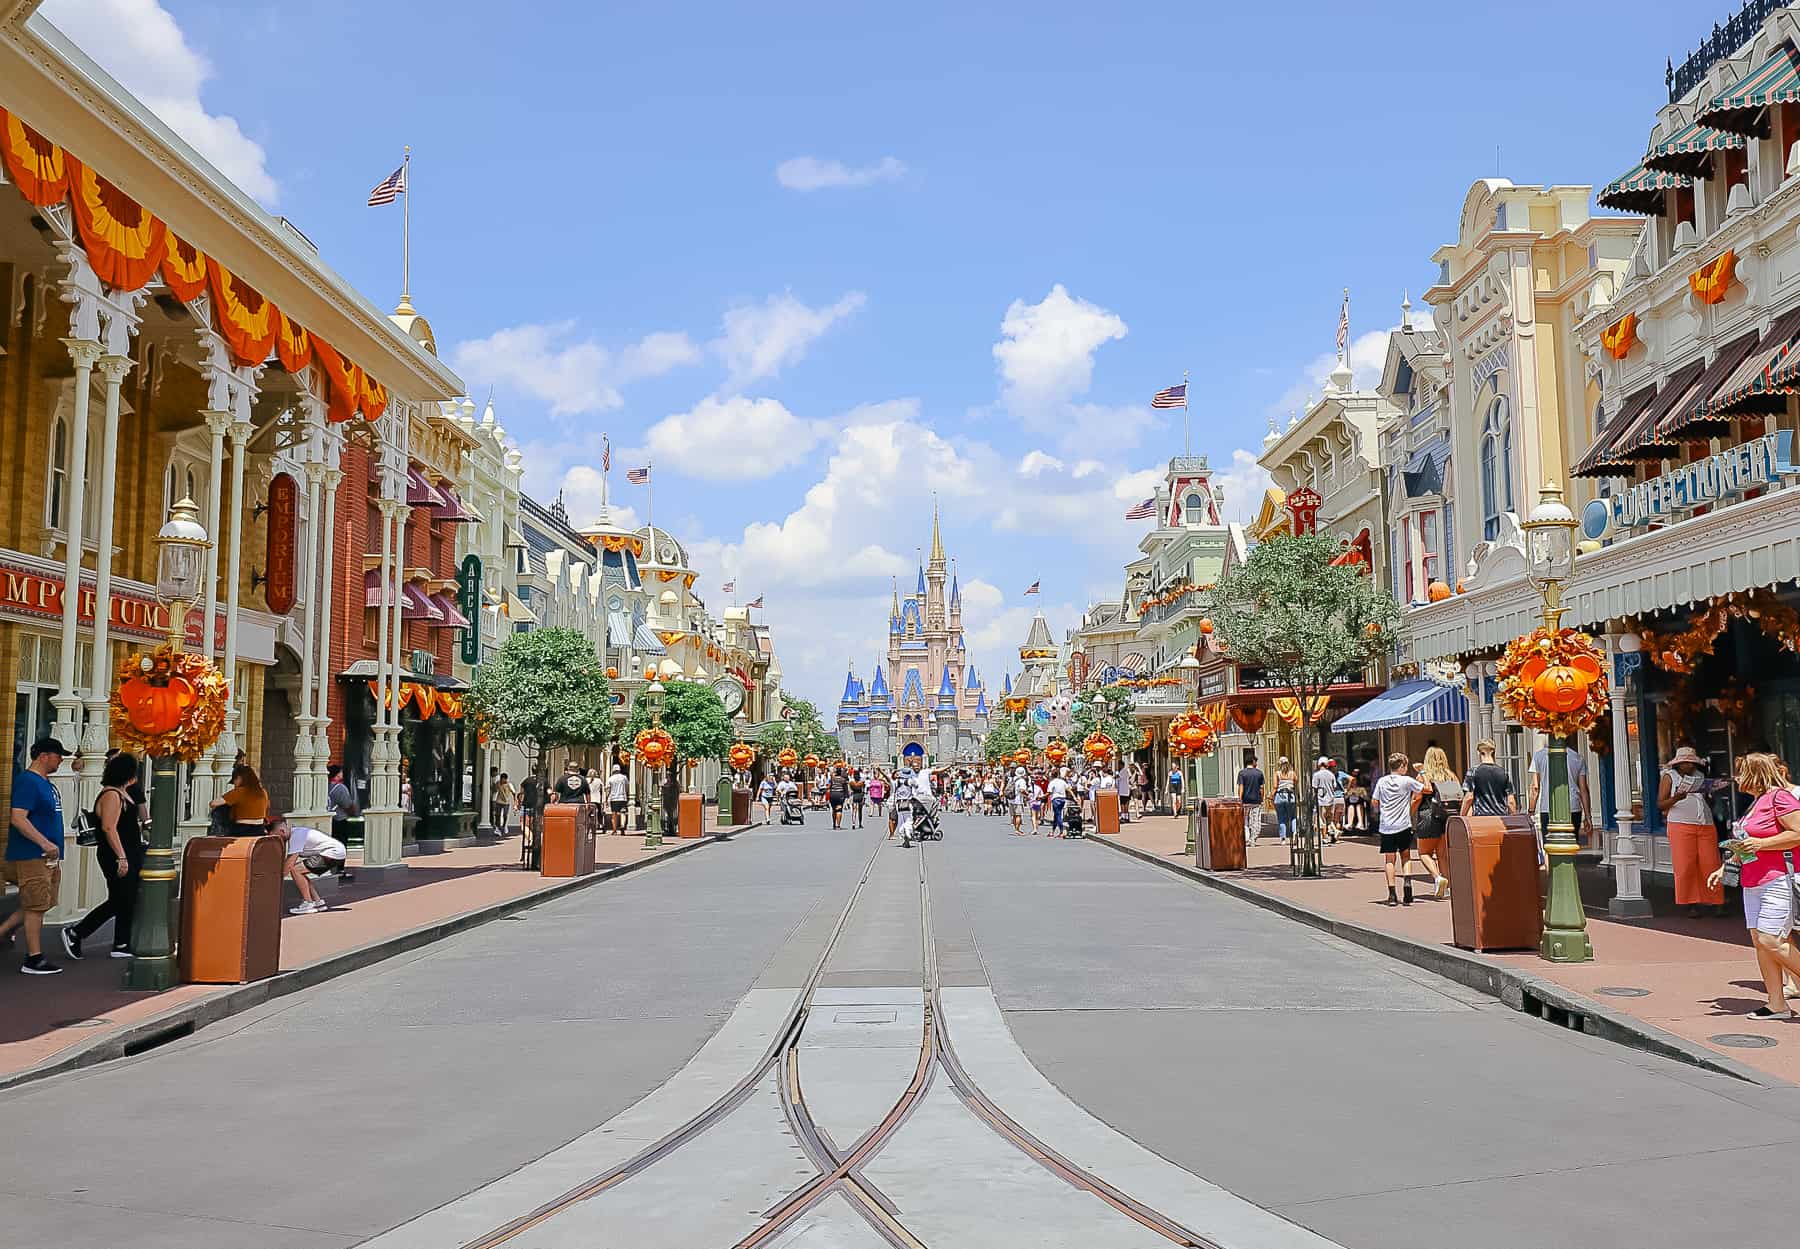 Cinderella Castle sitting at the end of Main Street USA. 